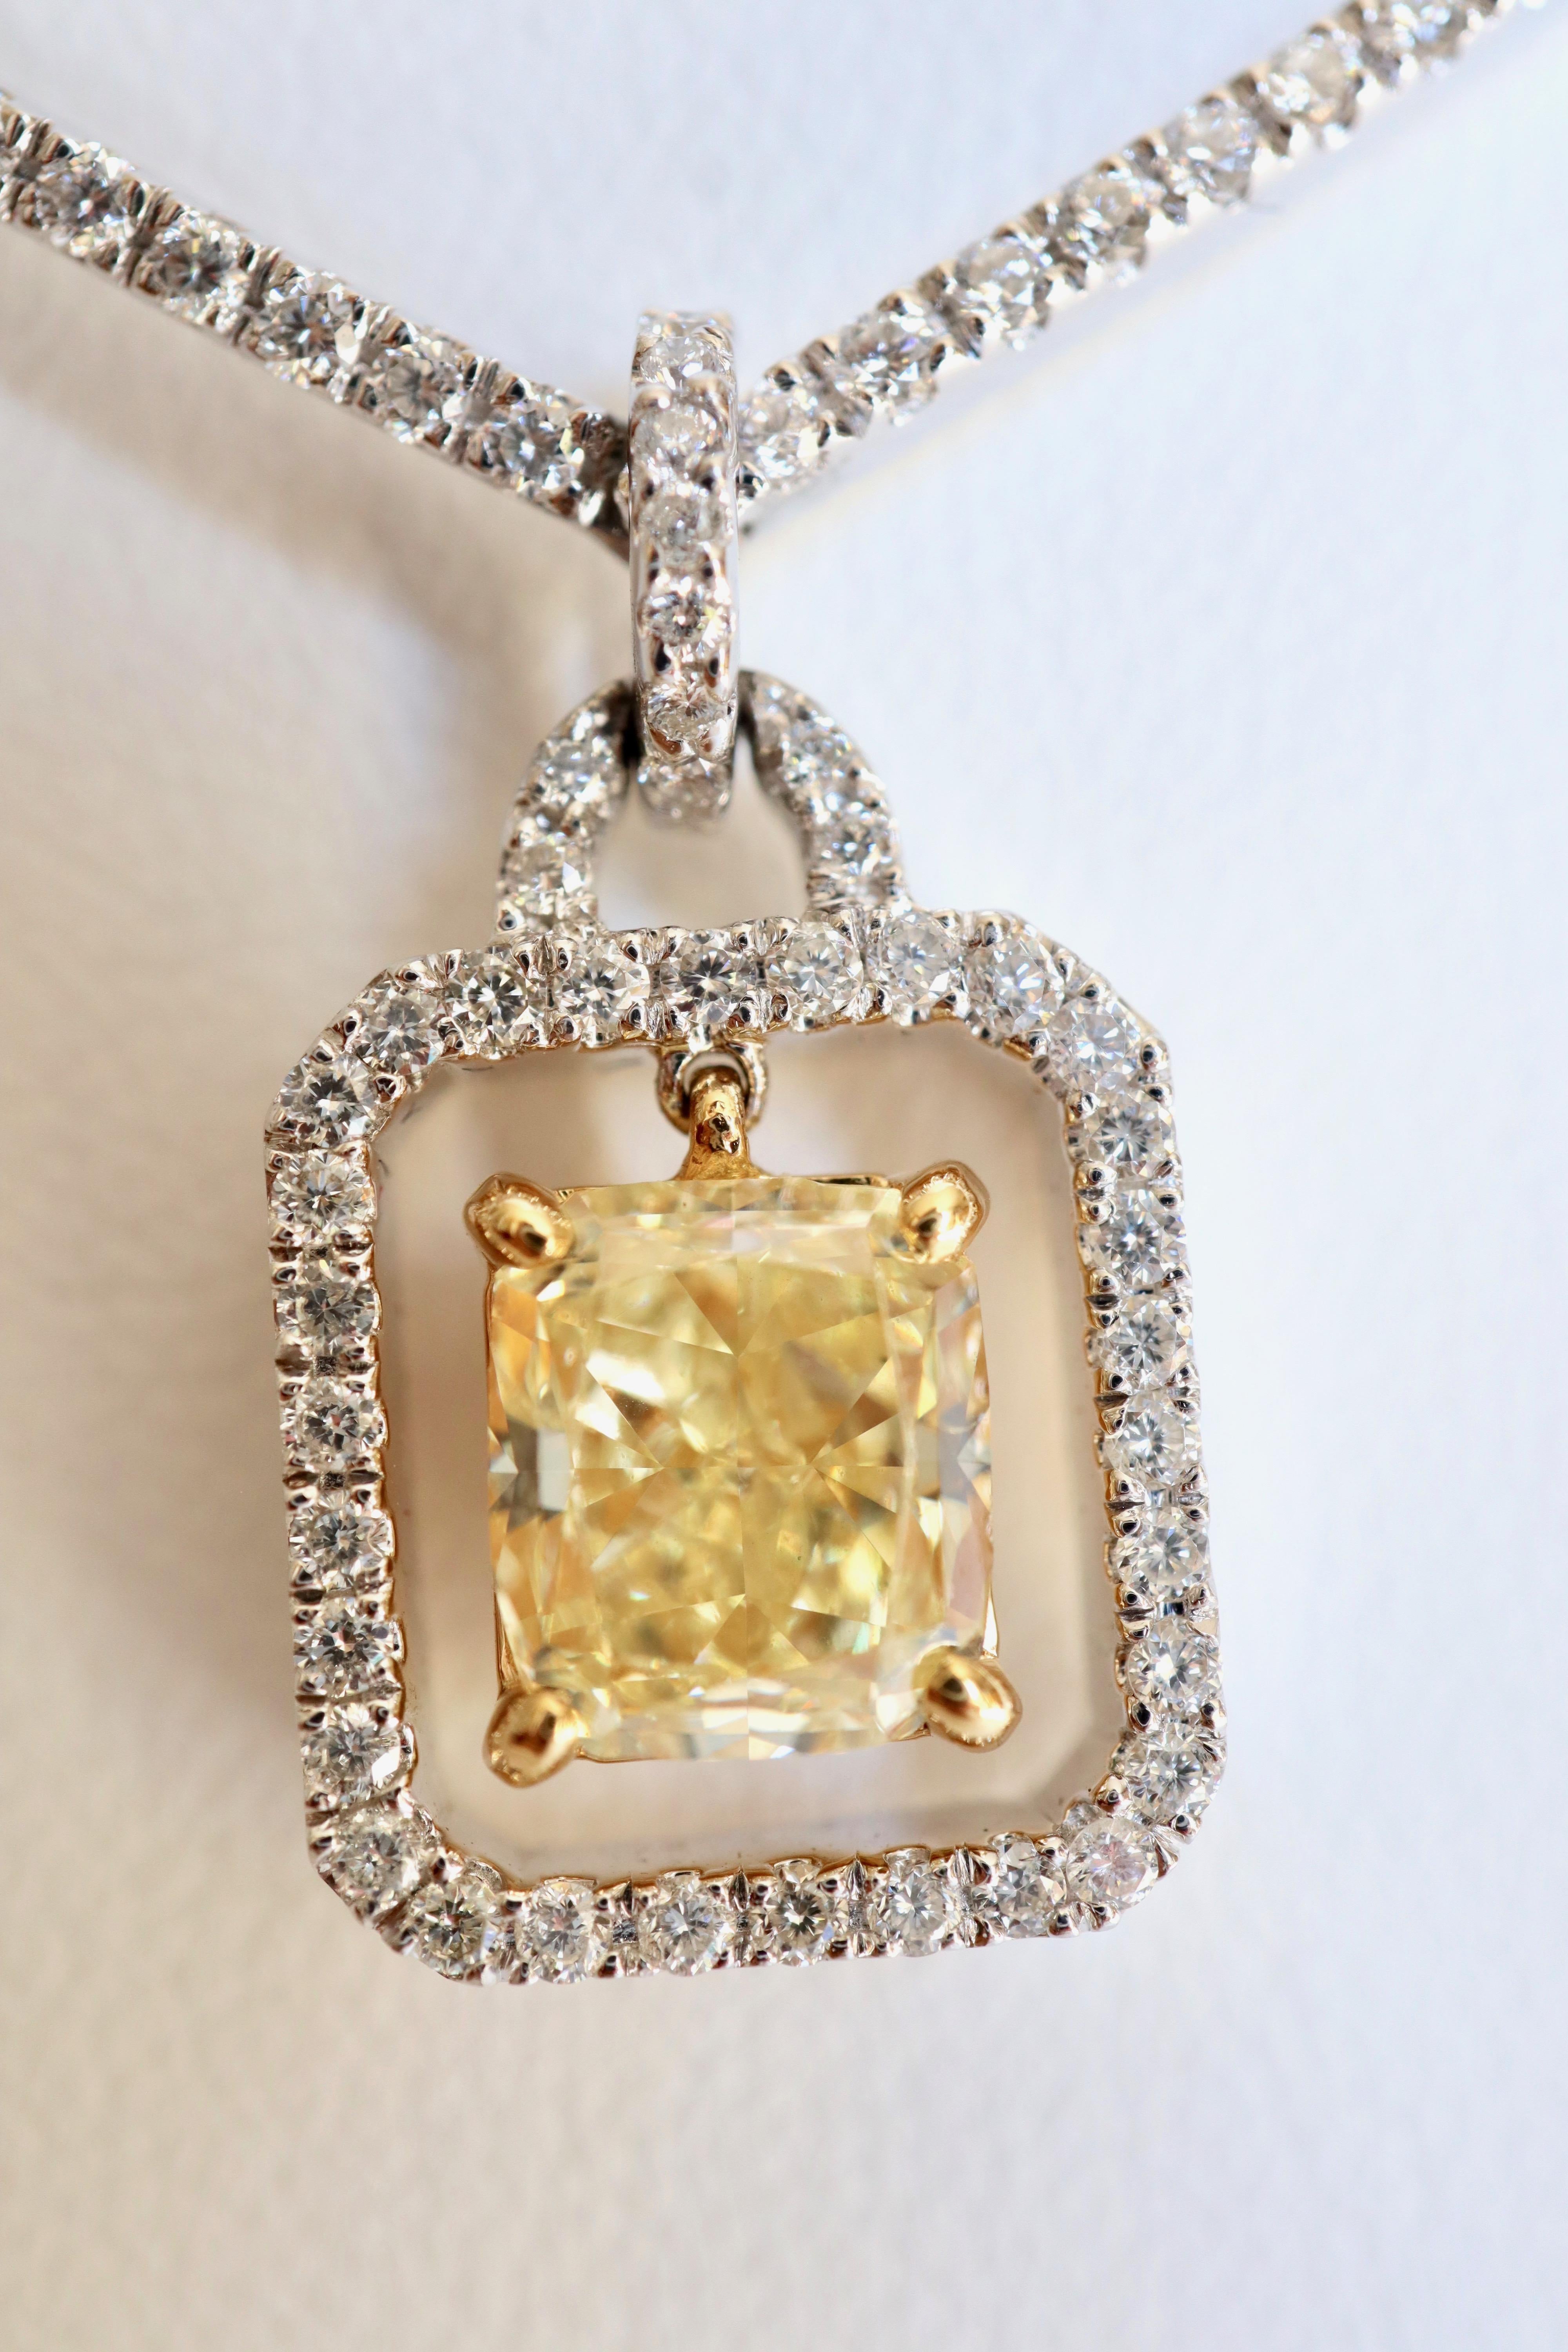 Necklace in 18 Carat white Gold, PT 950 Platinum and diamonds holding an Important Yellow Cushion Diamond sized 1.5 Carats.
It Consists of 23 Rigid Sticks in 18-Carat white Gold paved with Diamonds alternated with 22 Brilliant-Cut Diamonds.
Length: